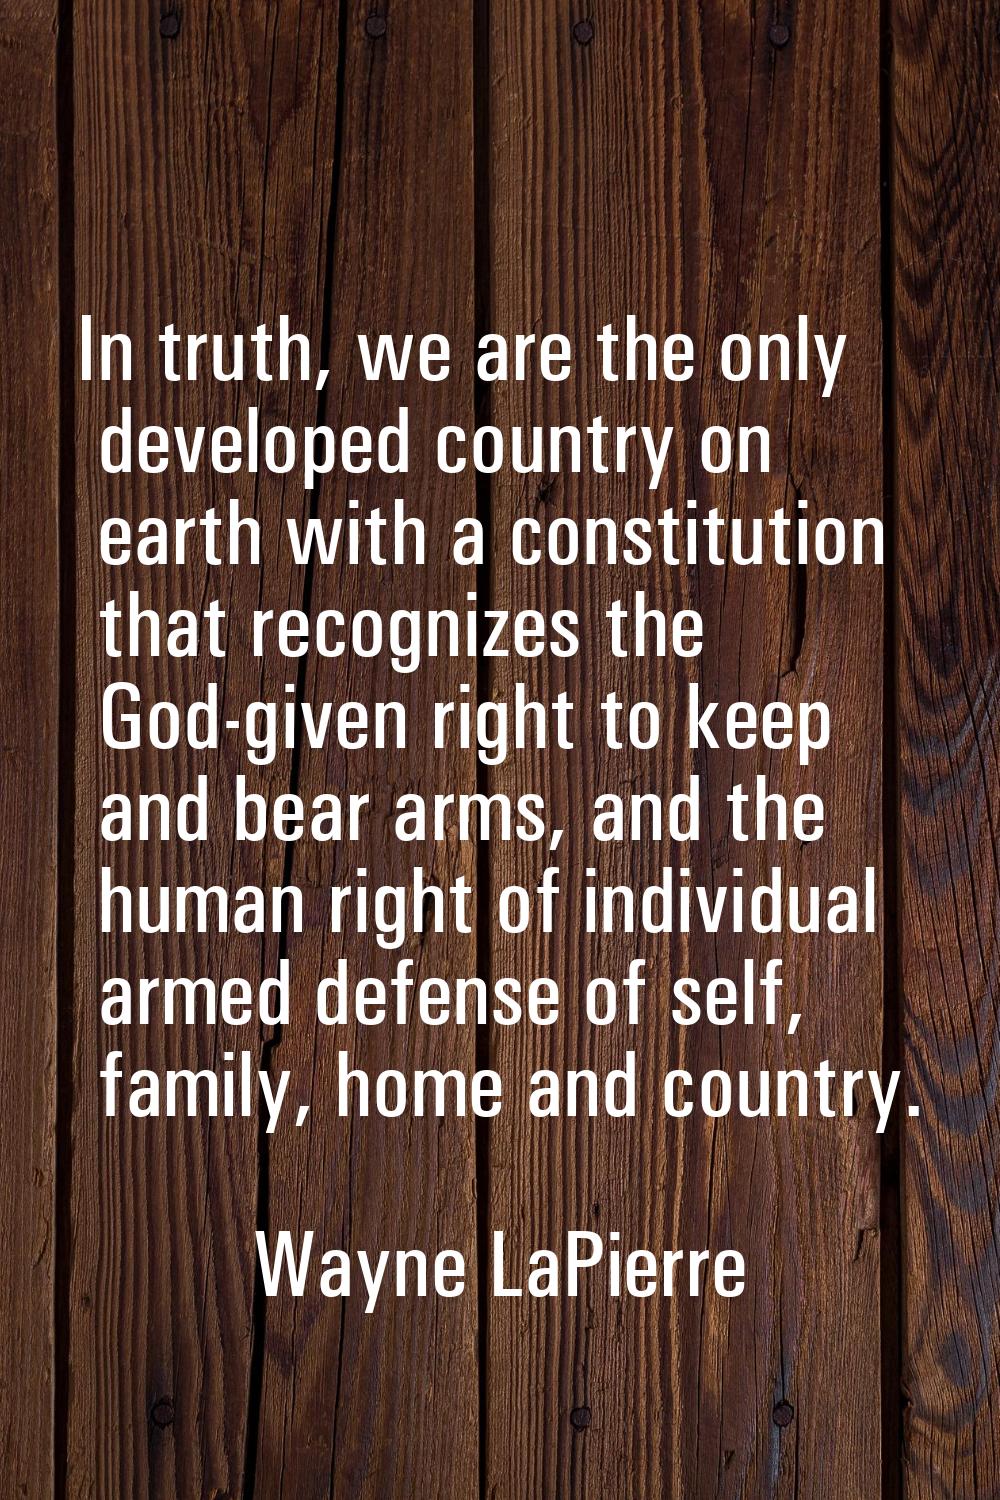 In truth, we are the only developed country on earth with a constitution that recognizes the God-gi